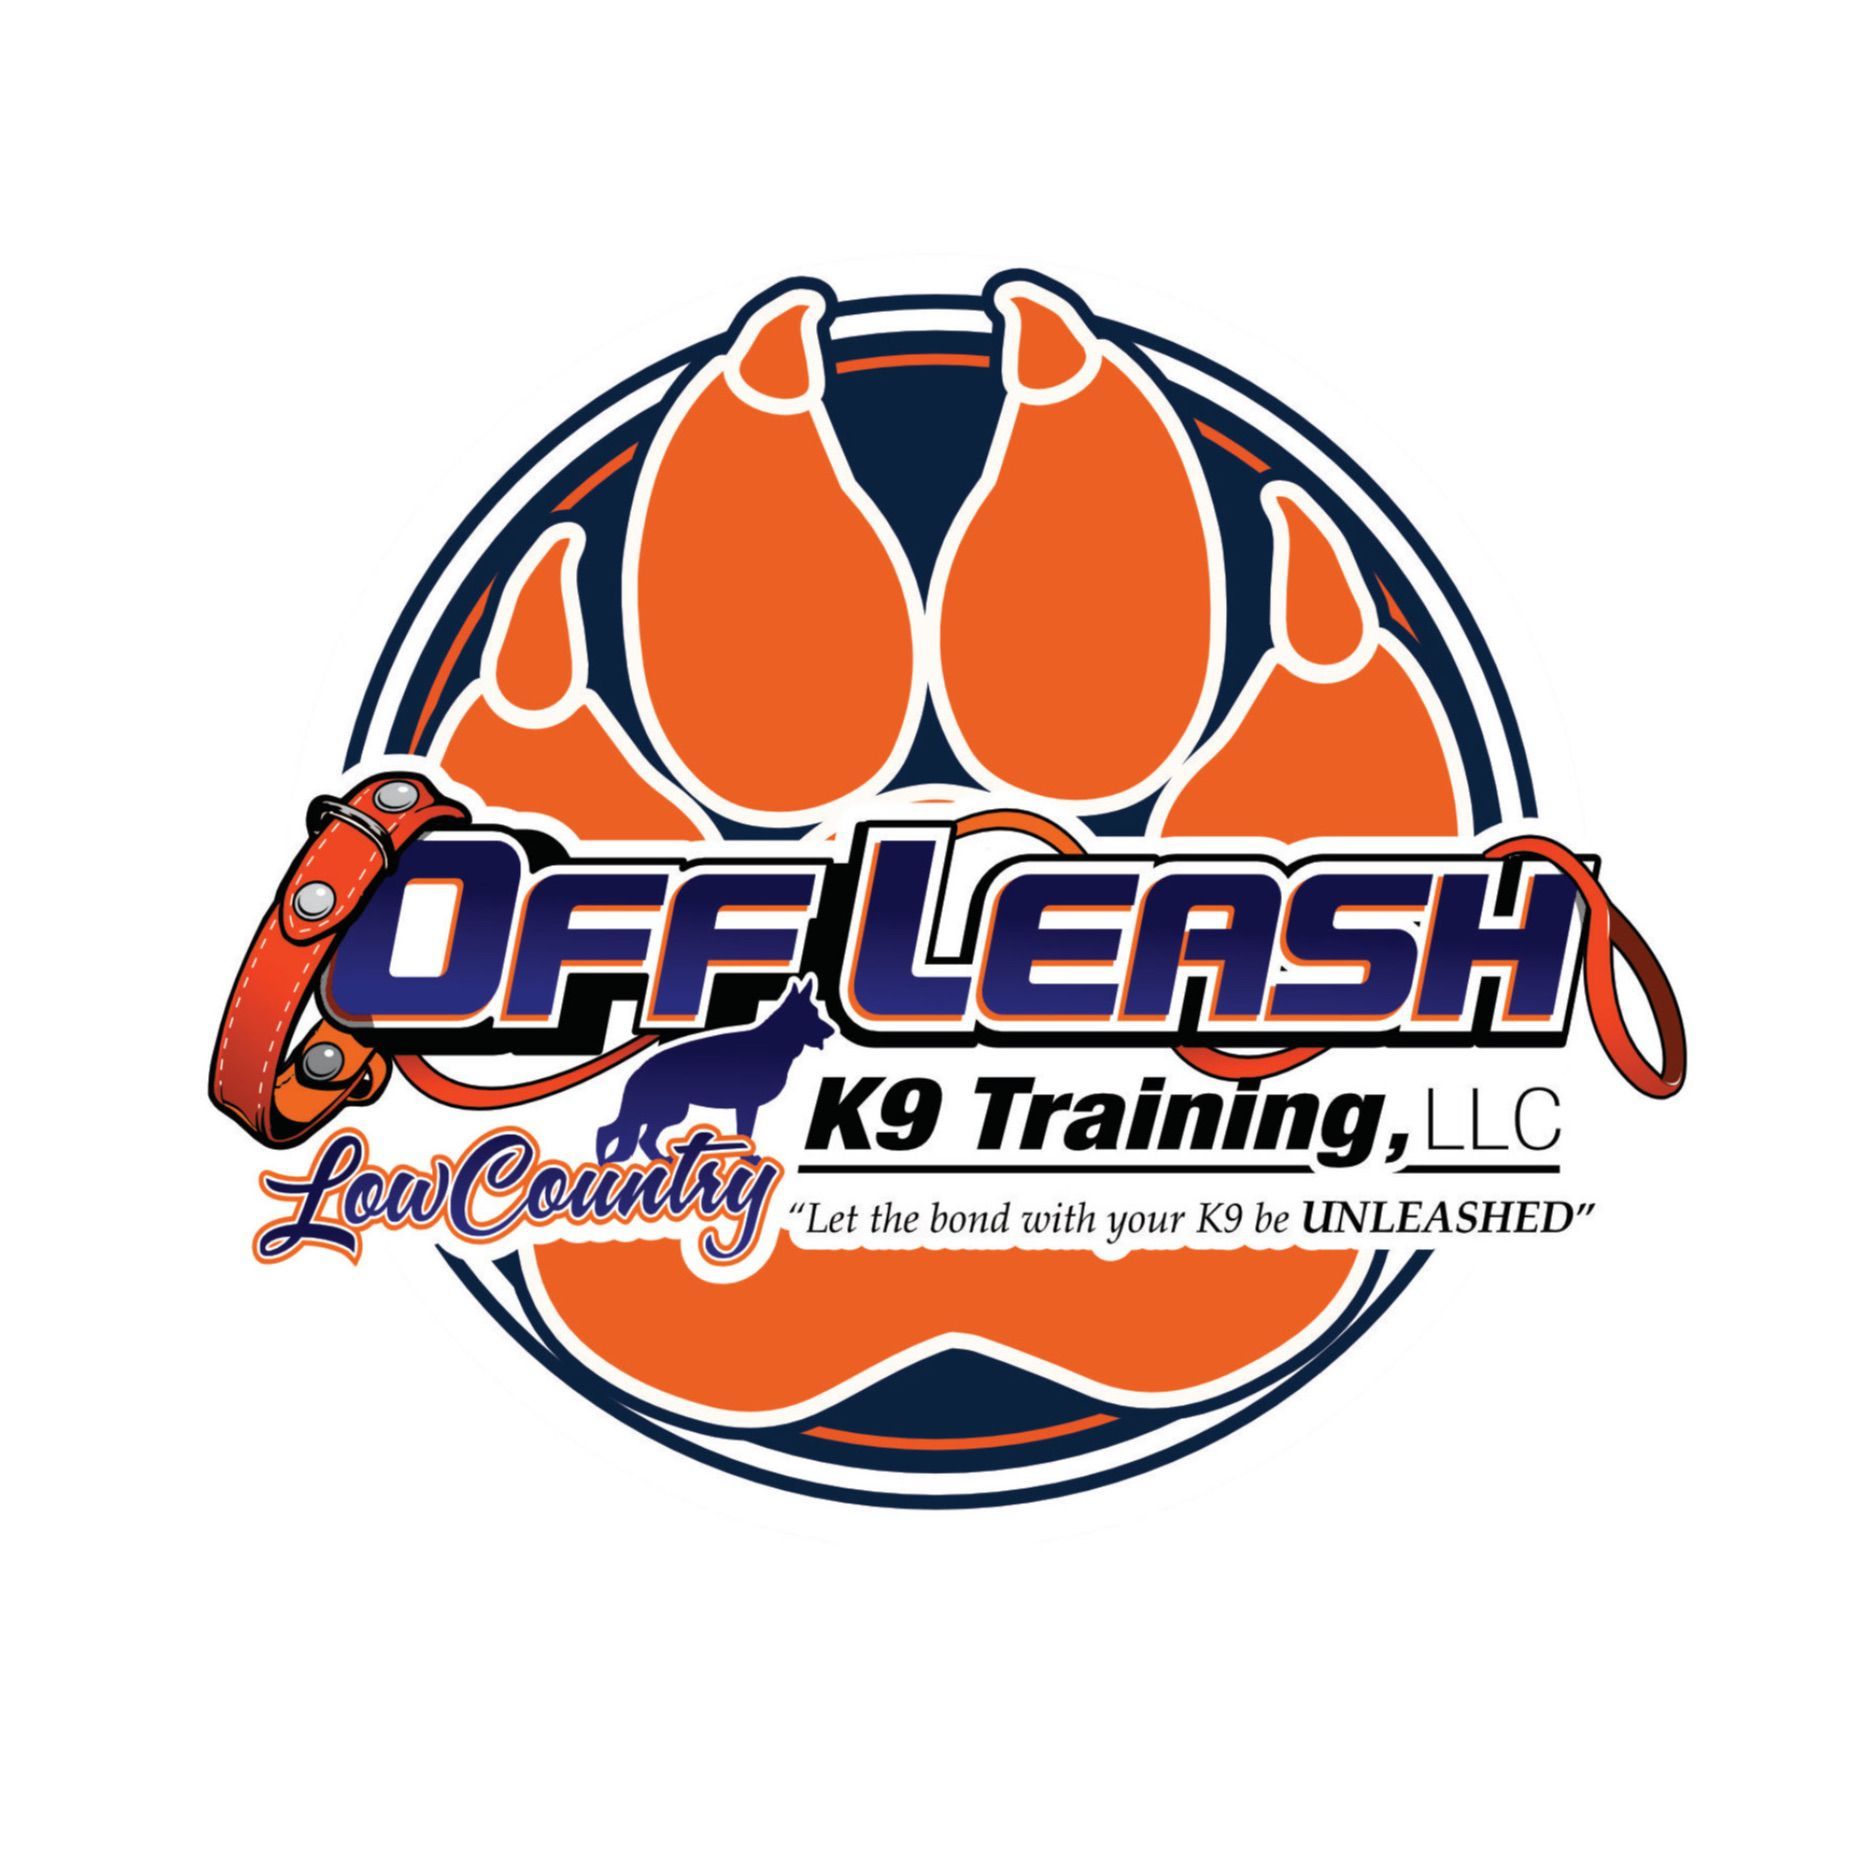 Off Leash K9 Training of the LowCountry, 90 Mangrove Pt, Hardeeville, 29927